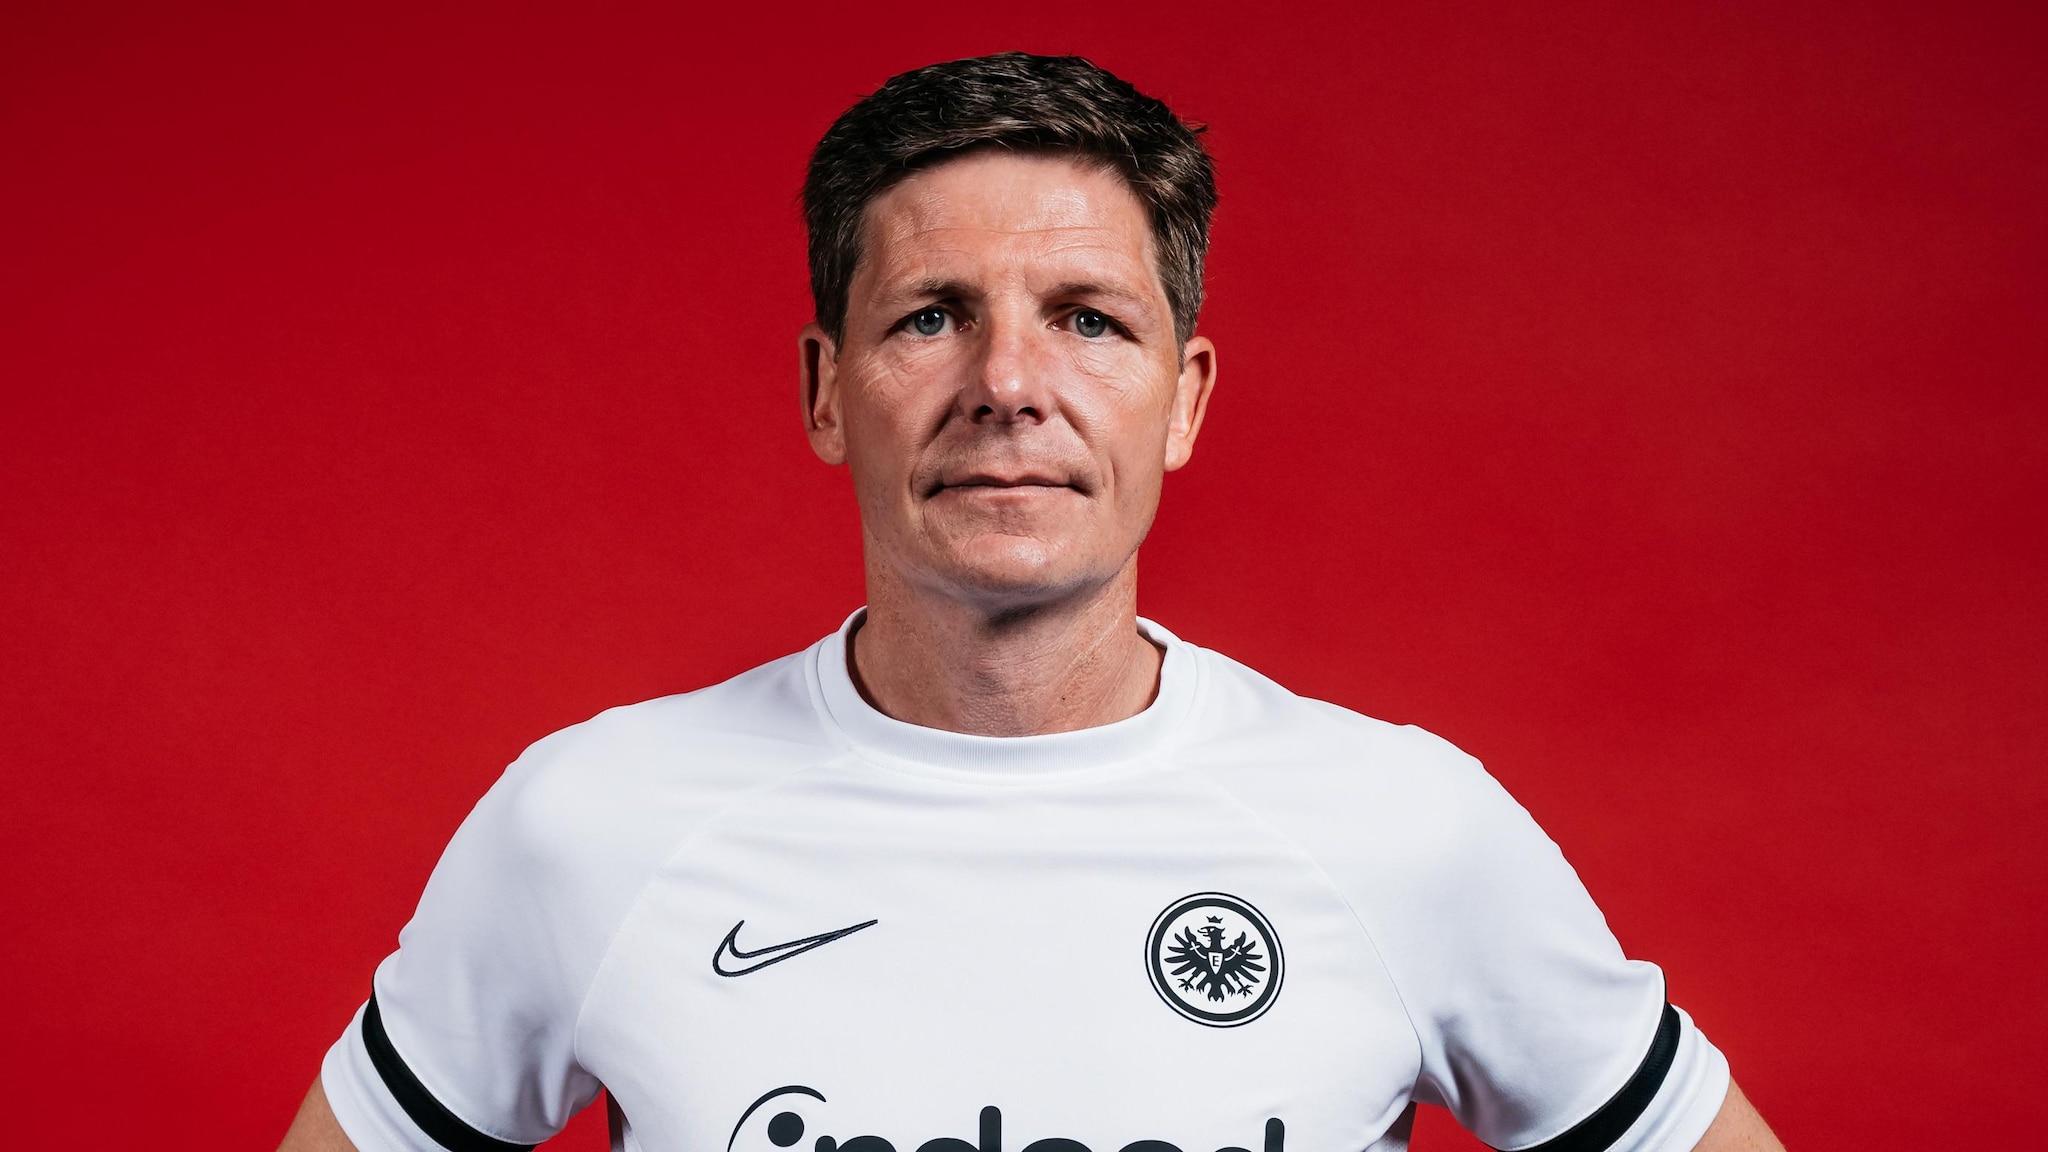 Frankfurt coach Oliver Glasner on the UEFA Europa League final against  Rangers, his team's passionate fans and making Austria proud – interview |  UEFA Europa League | UEFA.com